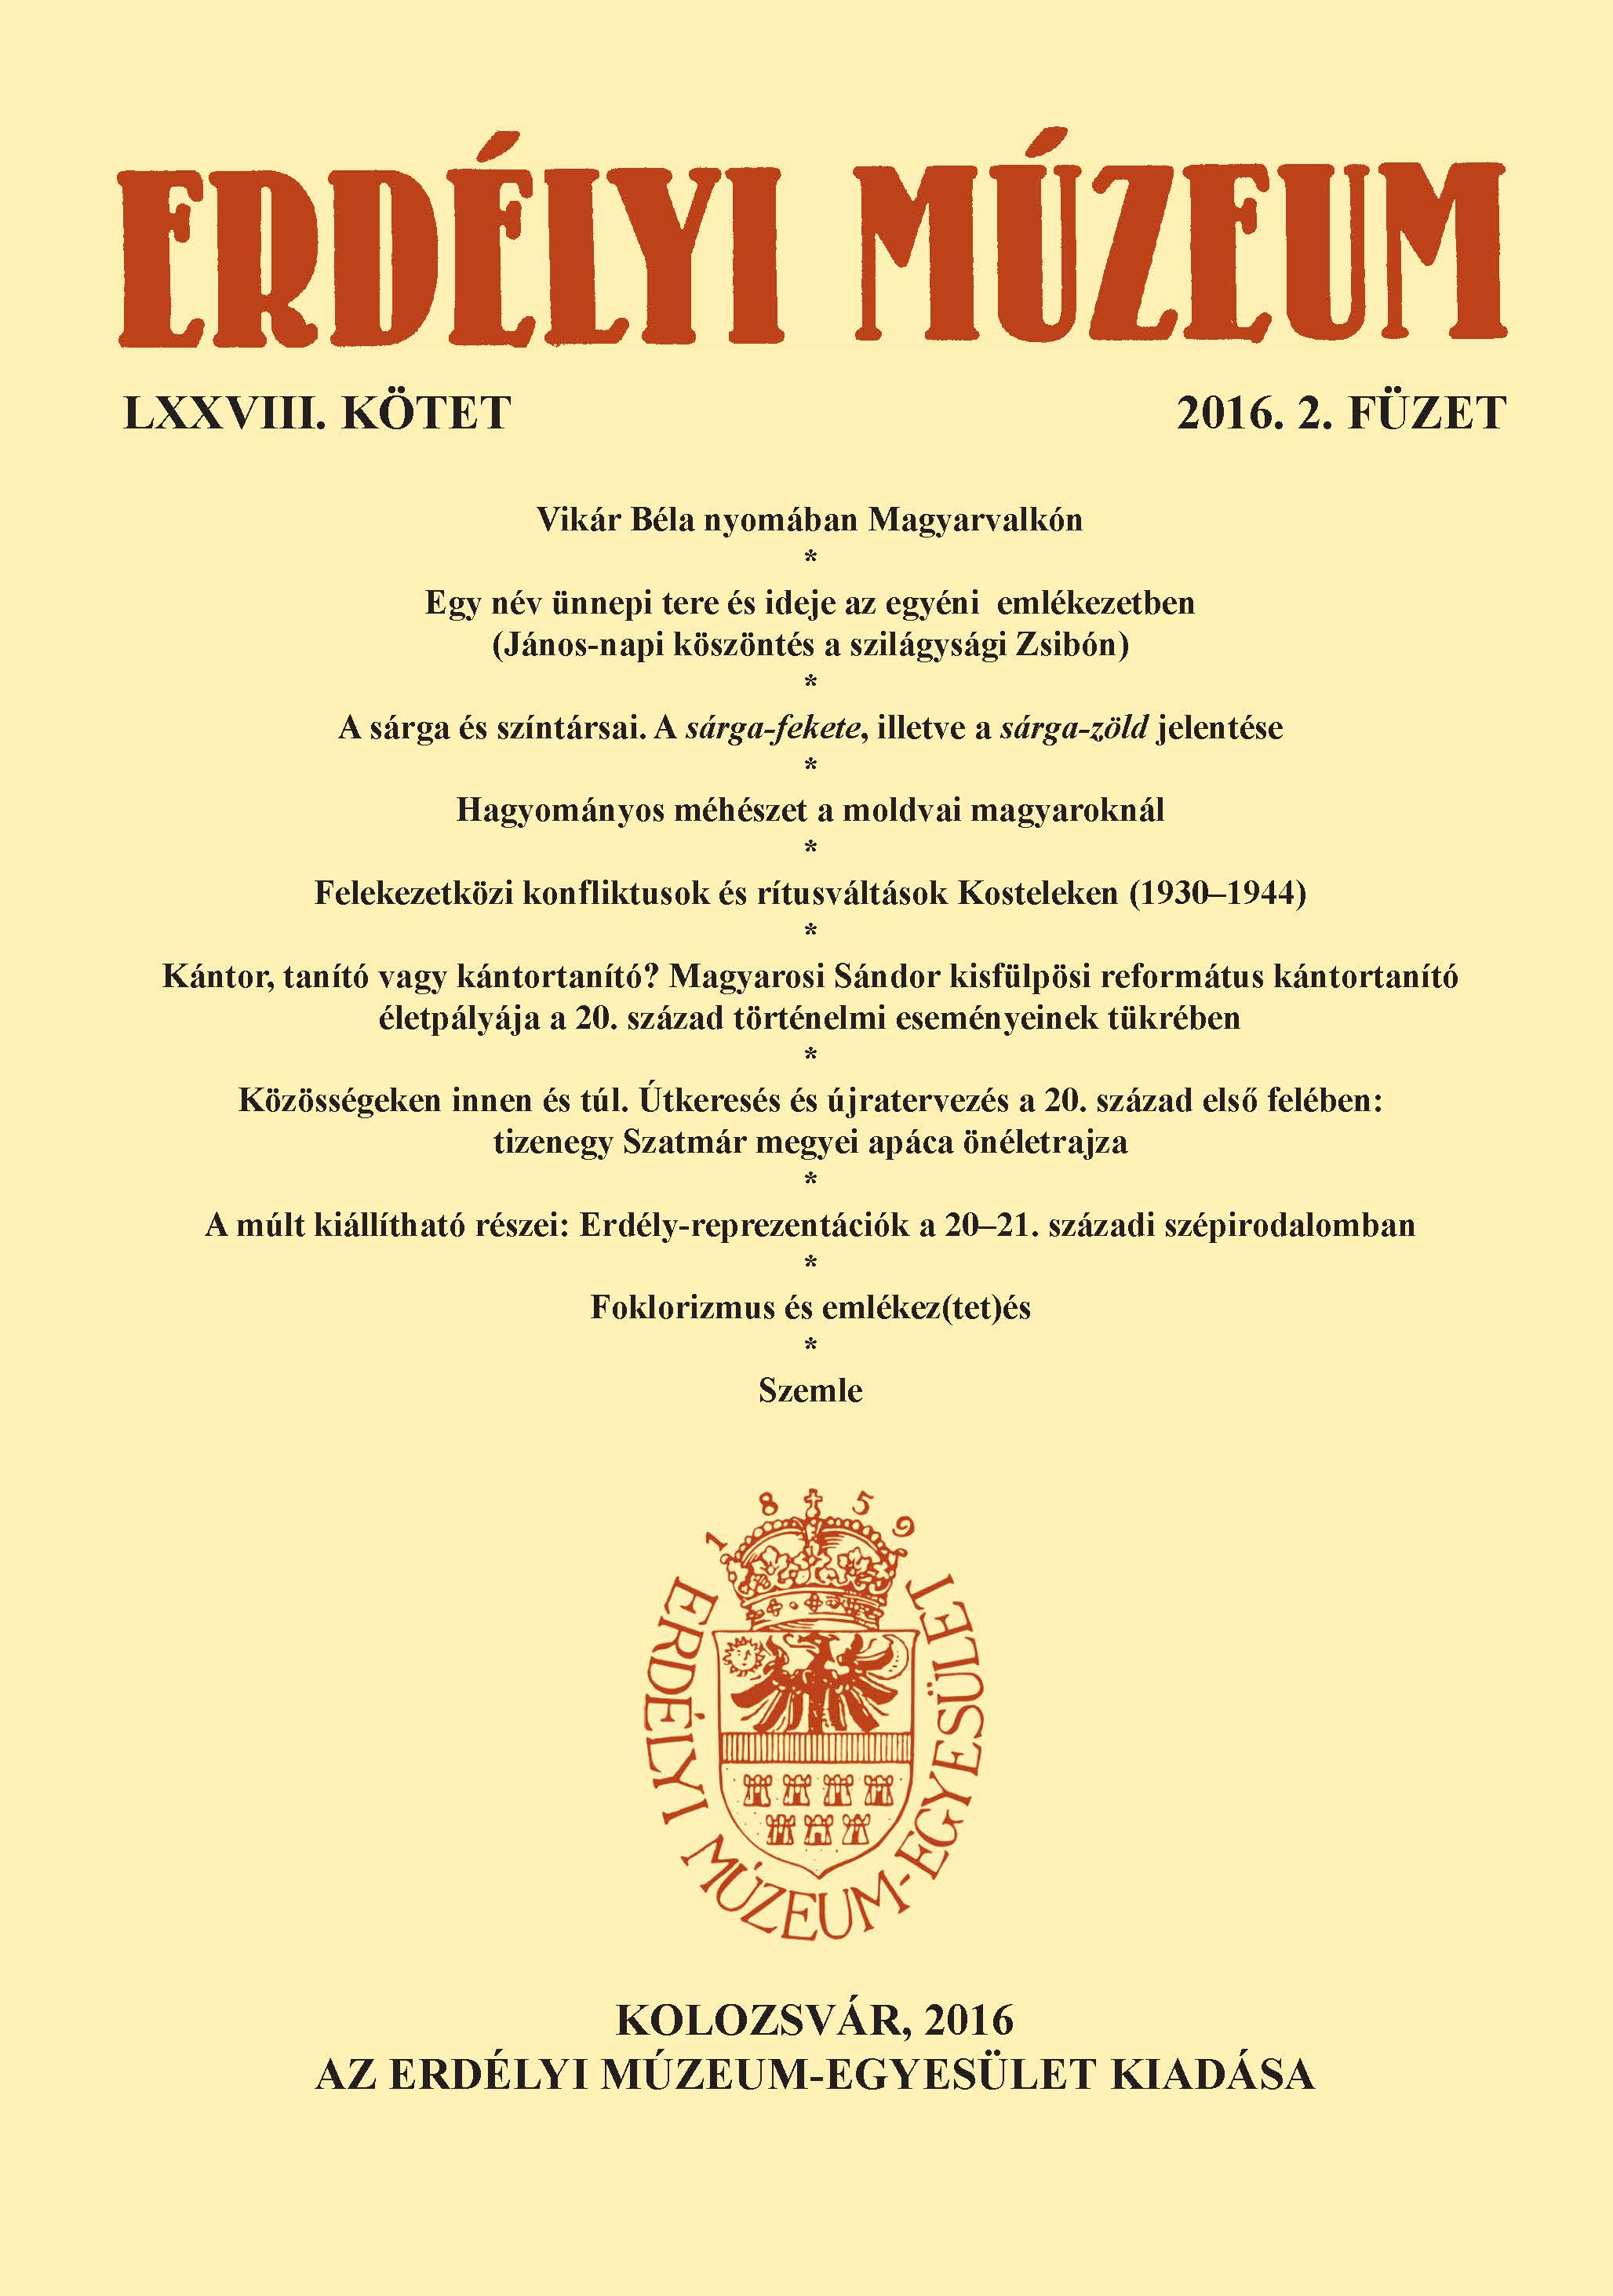 The Elements of the Past that can Exhibited. Transylvania-Representations in the Literature of the 20th-21st Centuries Cover Image